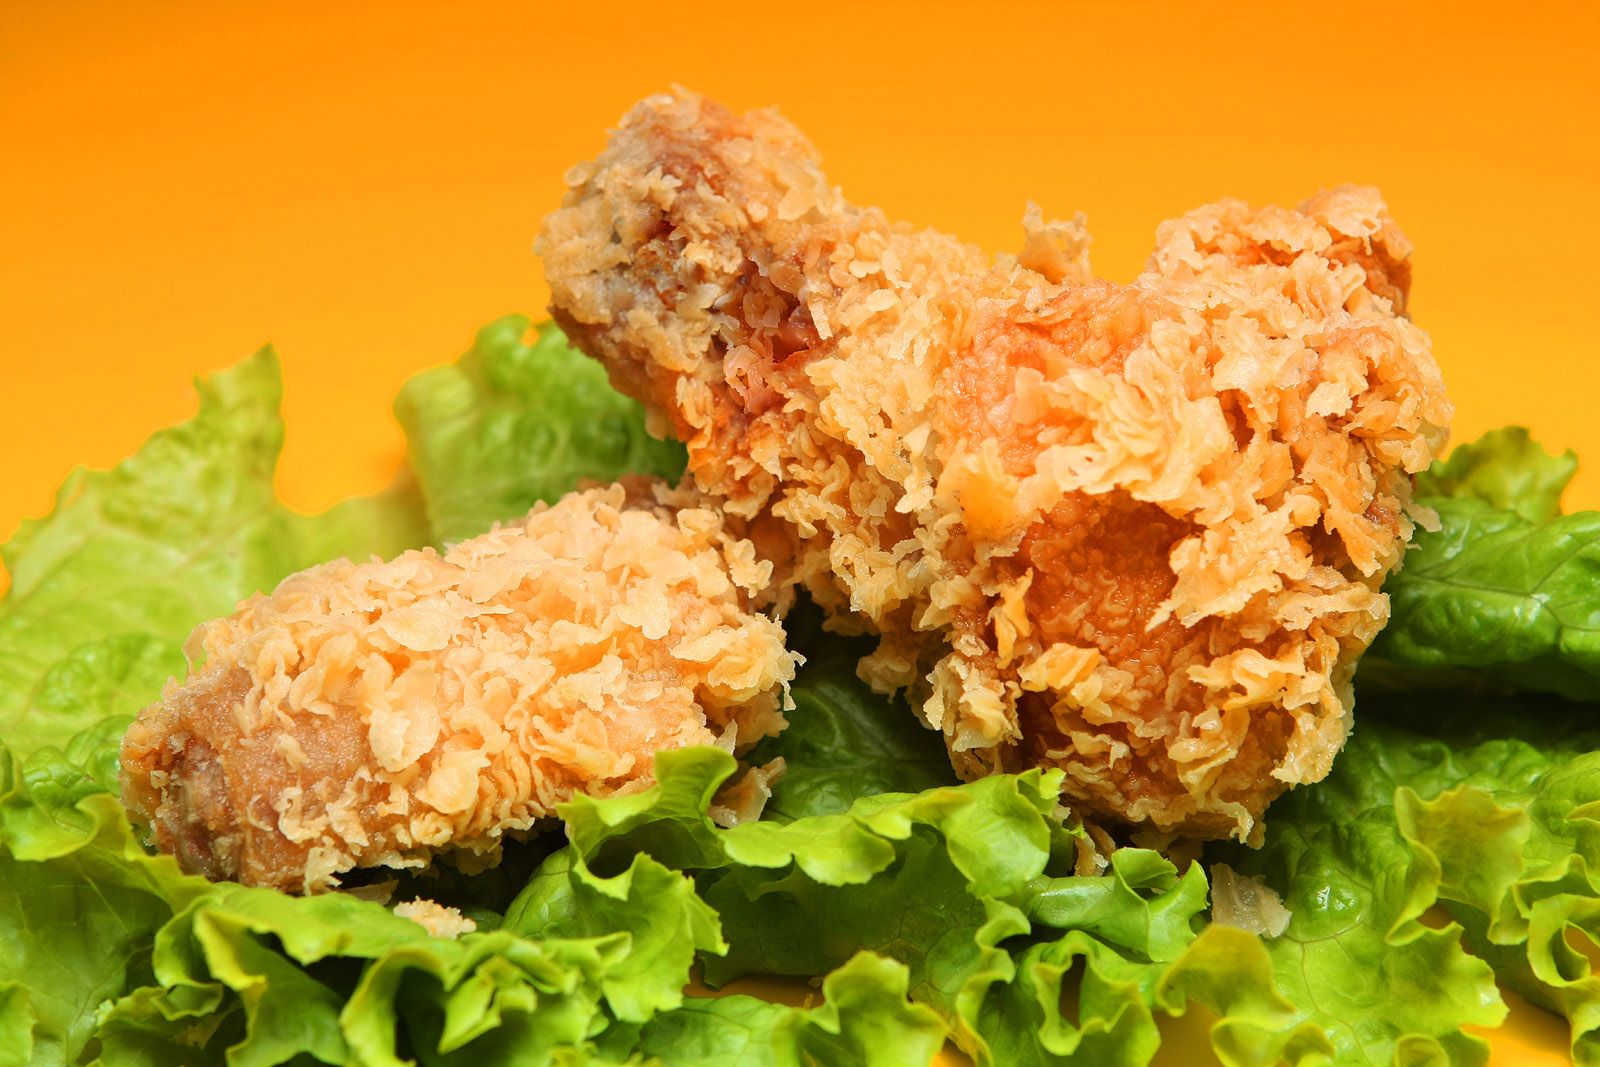 HD hamburgers and fried chicken picture 13935